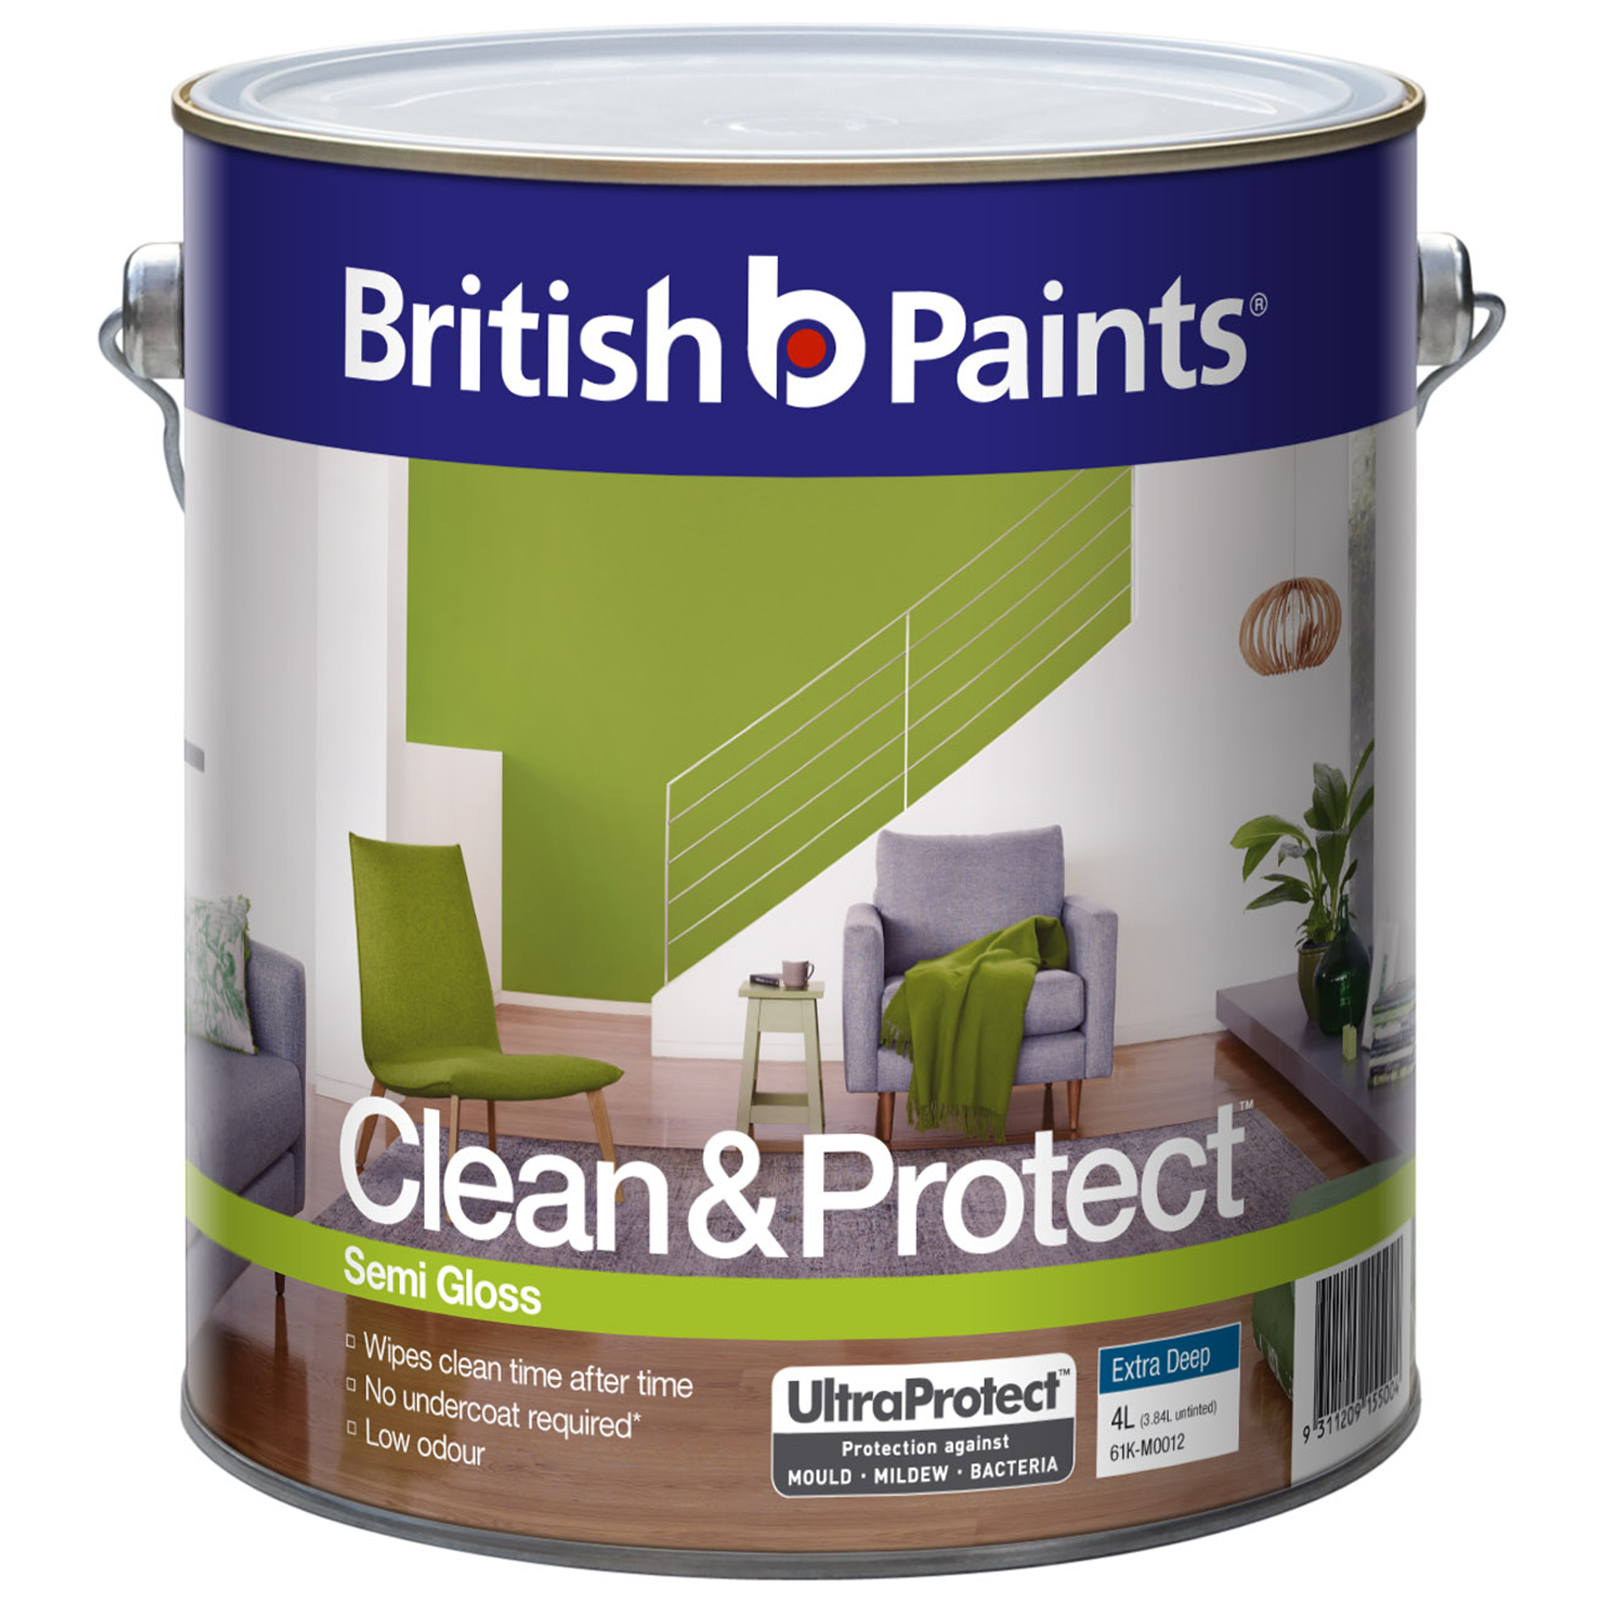 British Paints Clean & Protect 4L Semi Gloss Extra Deep Interior Paint